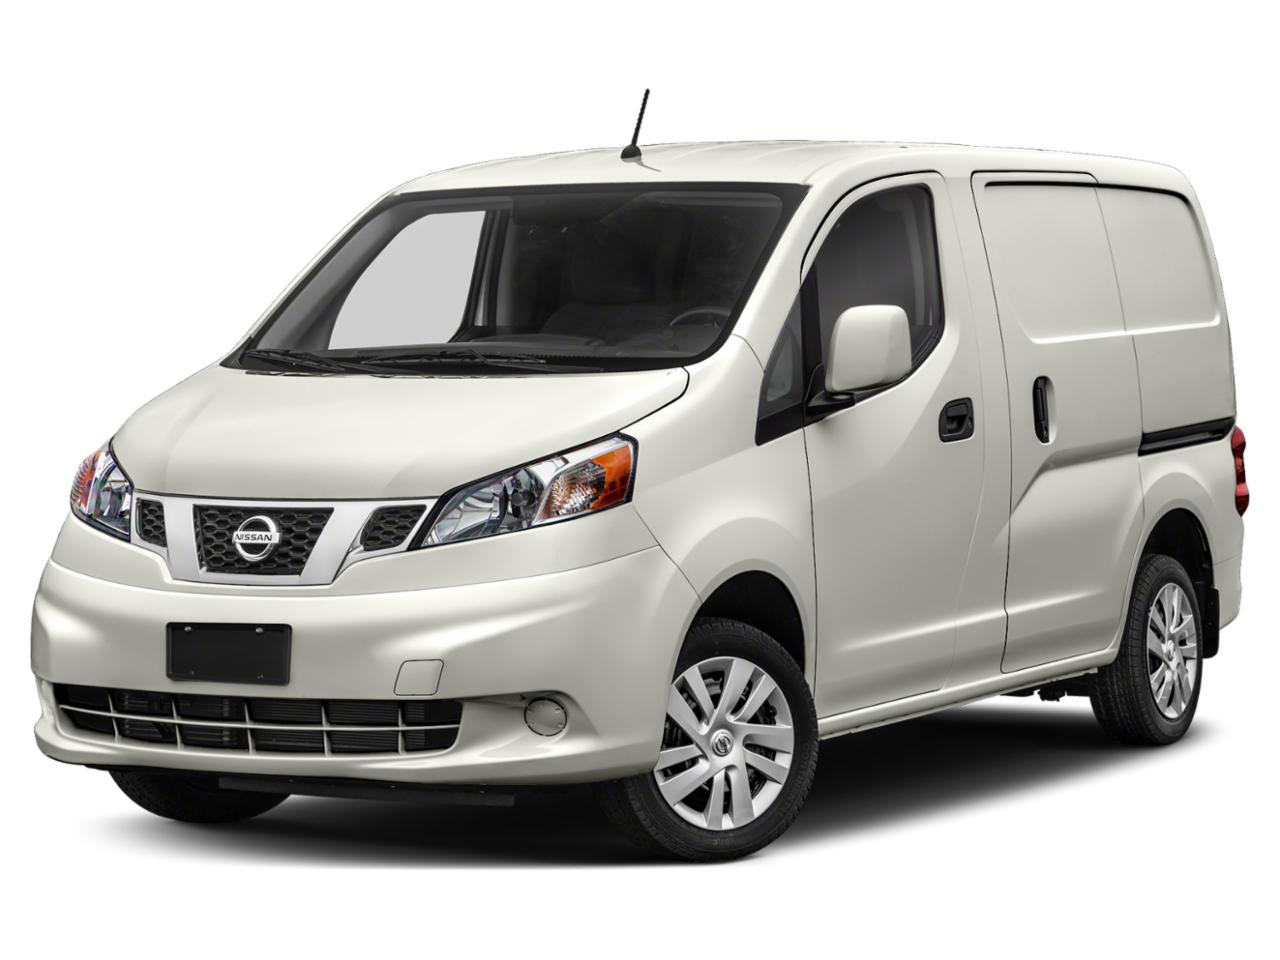 2019 Nissan NV200 Compact Cargo Vehicle Photo in SELMA, TX 78154-1459